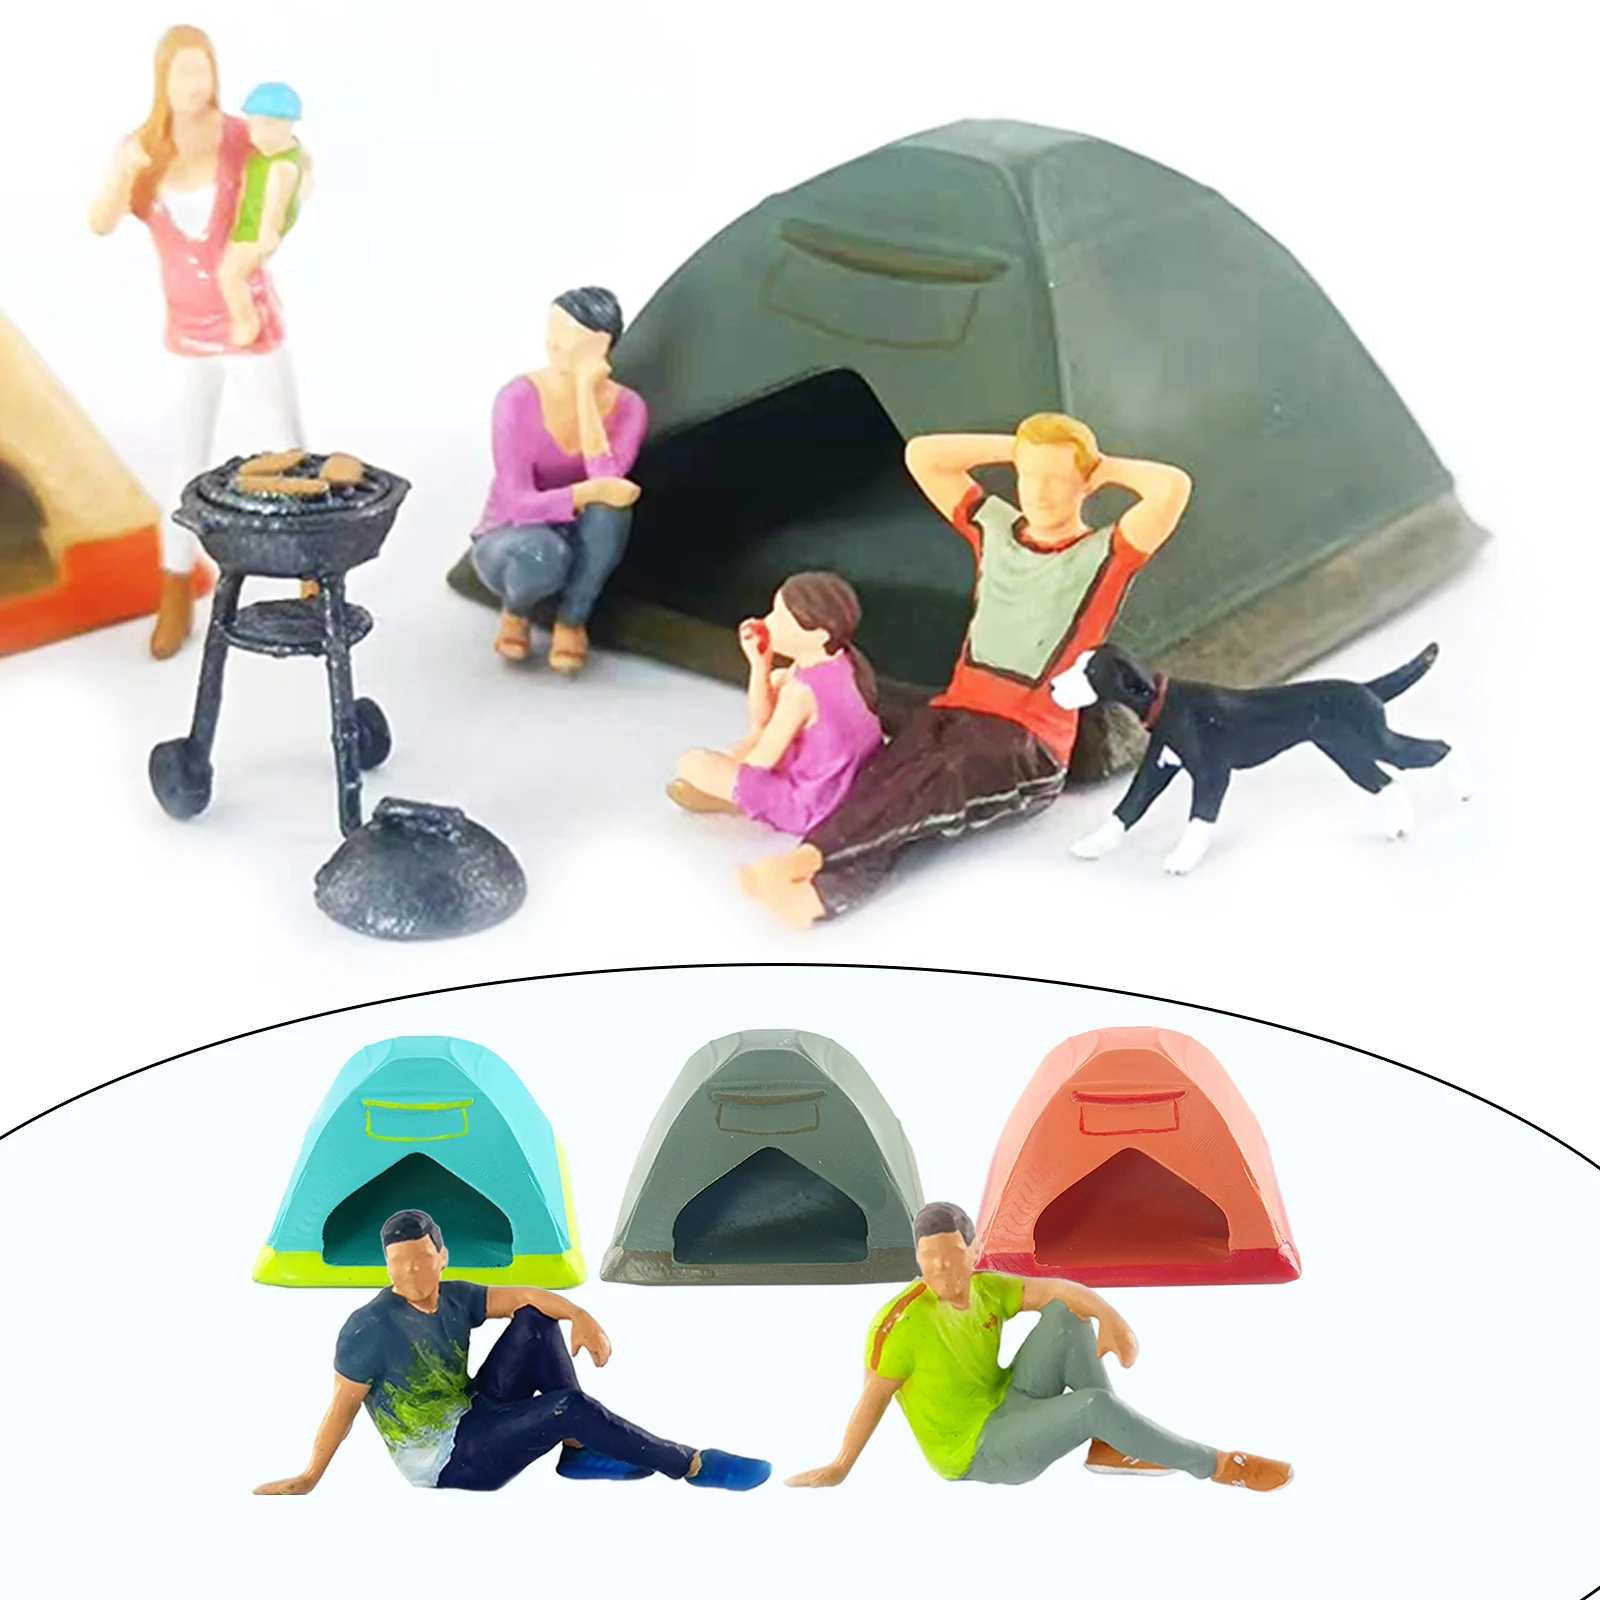 1/64 Scale Hand Painted Miniature Model Scenario Figures Camping Scenes Sitting Pose Train People Character Toys Diorama